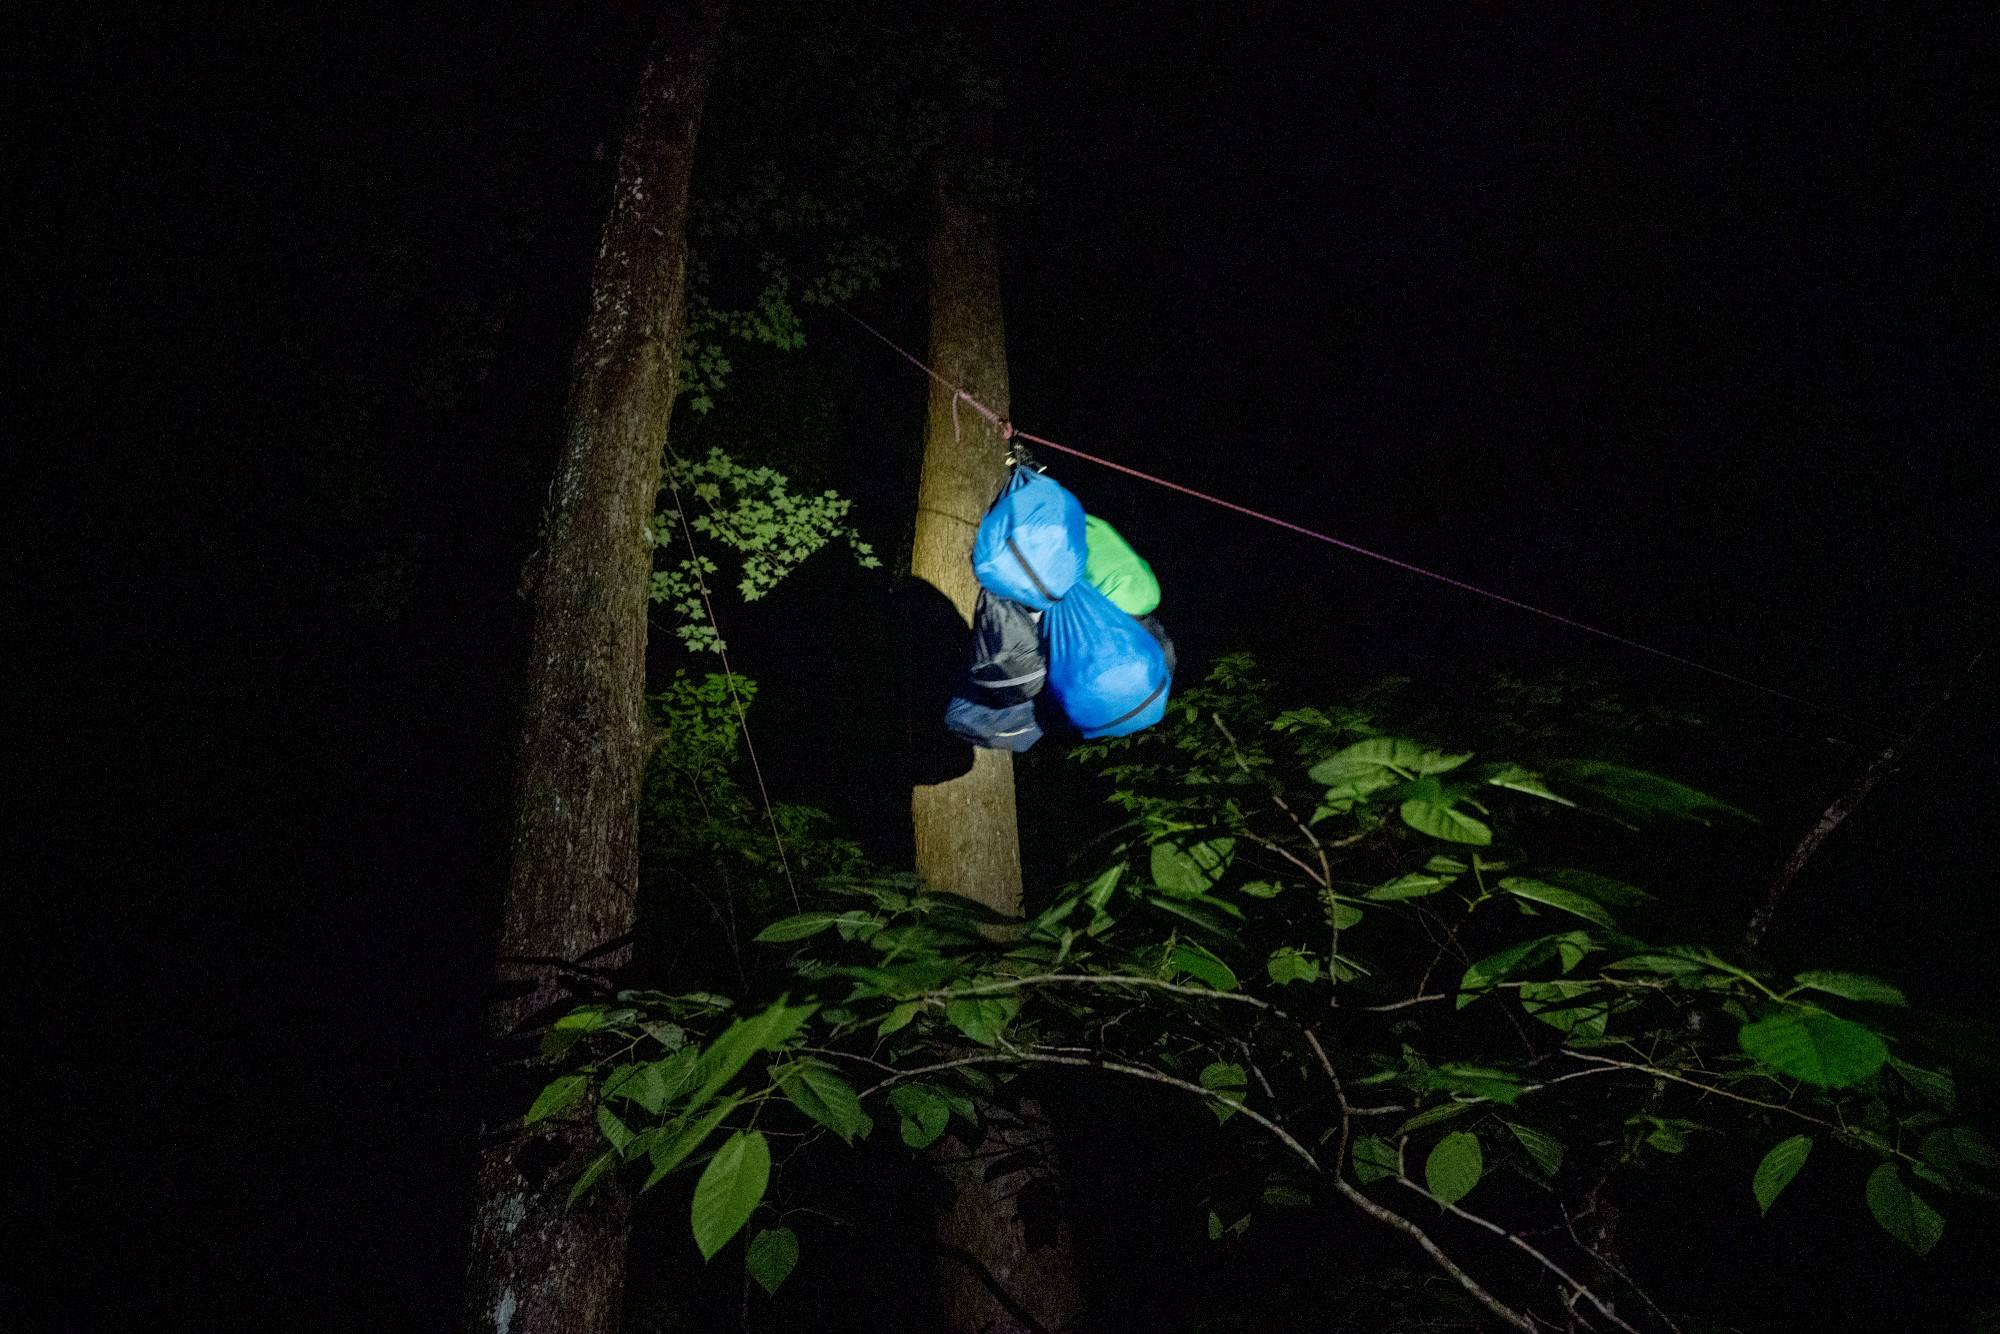 Every night students had to hang their food and anything else that might attract bears at least ten feet off of the group, at a location away from camp.